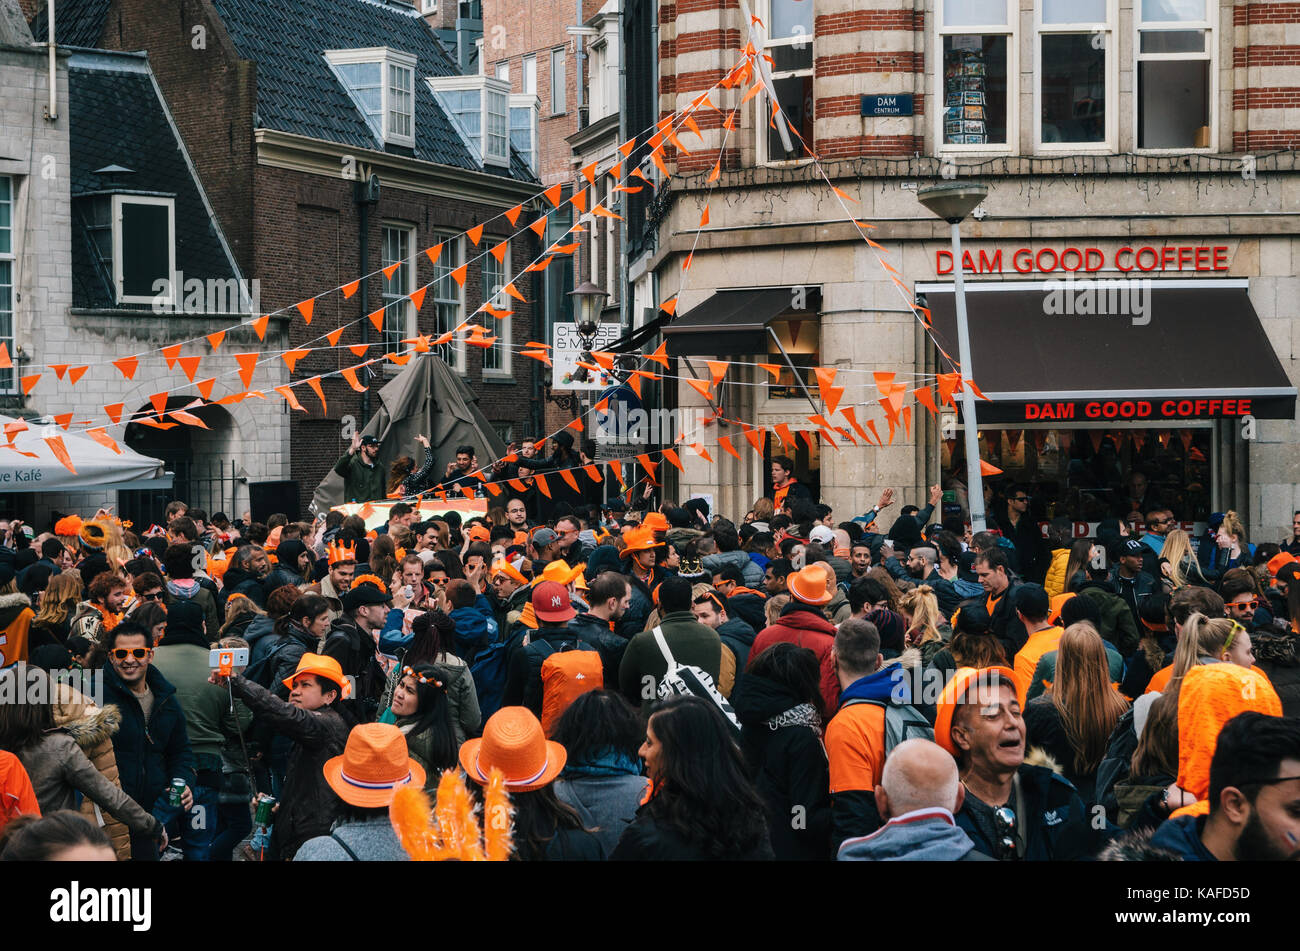 Amsterdam, Netherlands - 27 April, 2017: Streets of Amsterdam with orange decorations full of people in orange during the celebration of kings day. Stock Photo